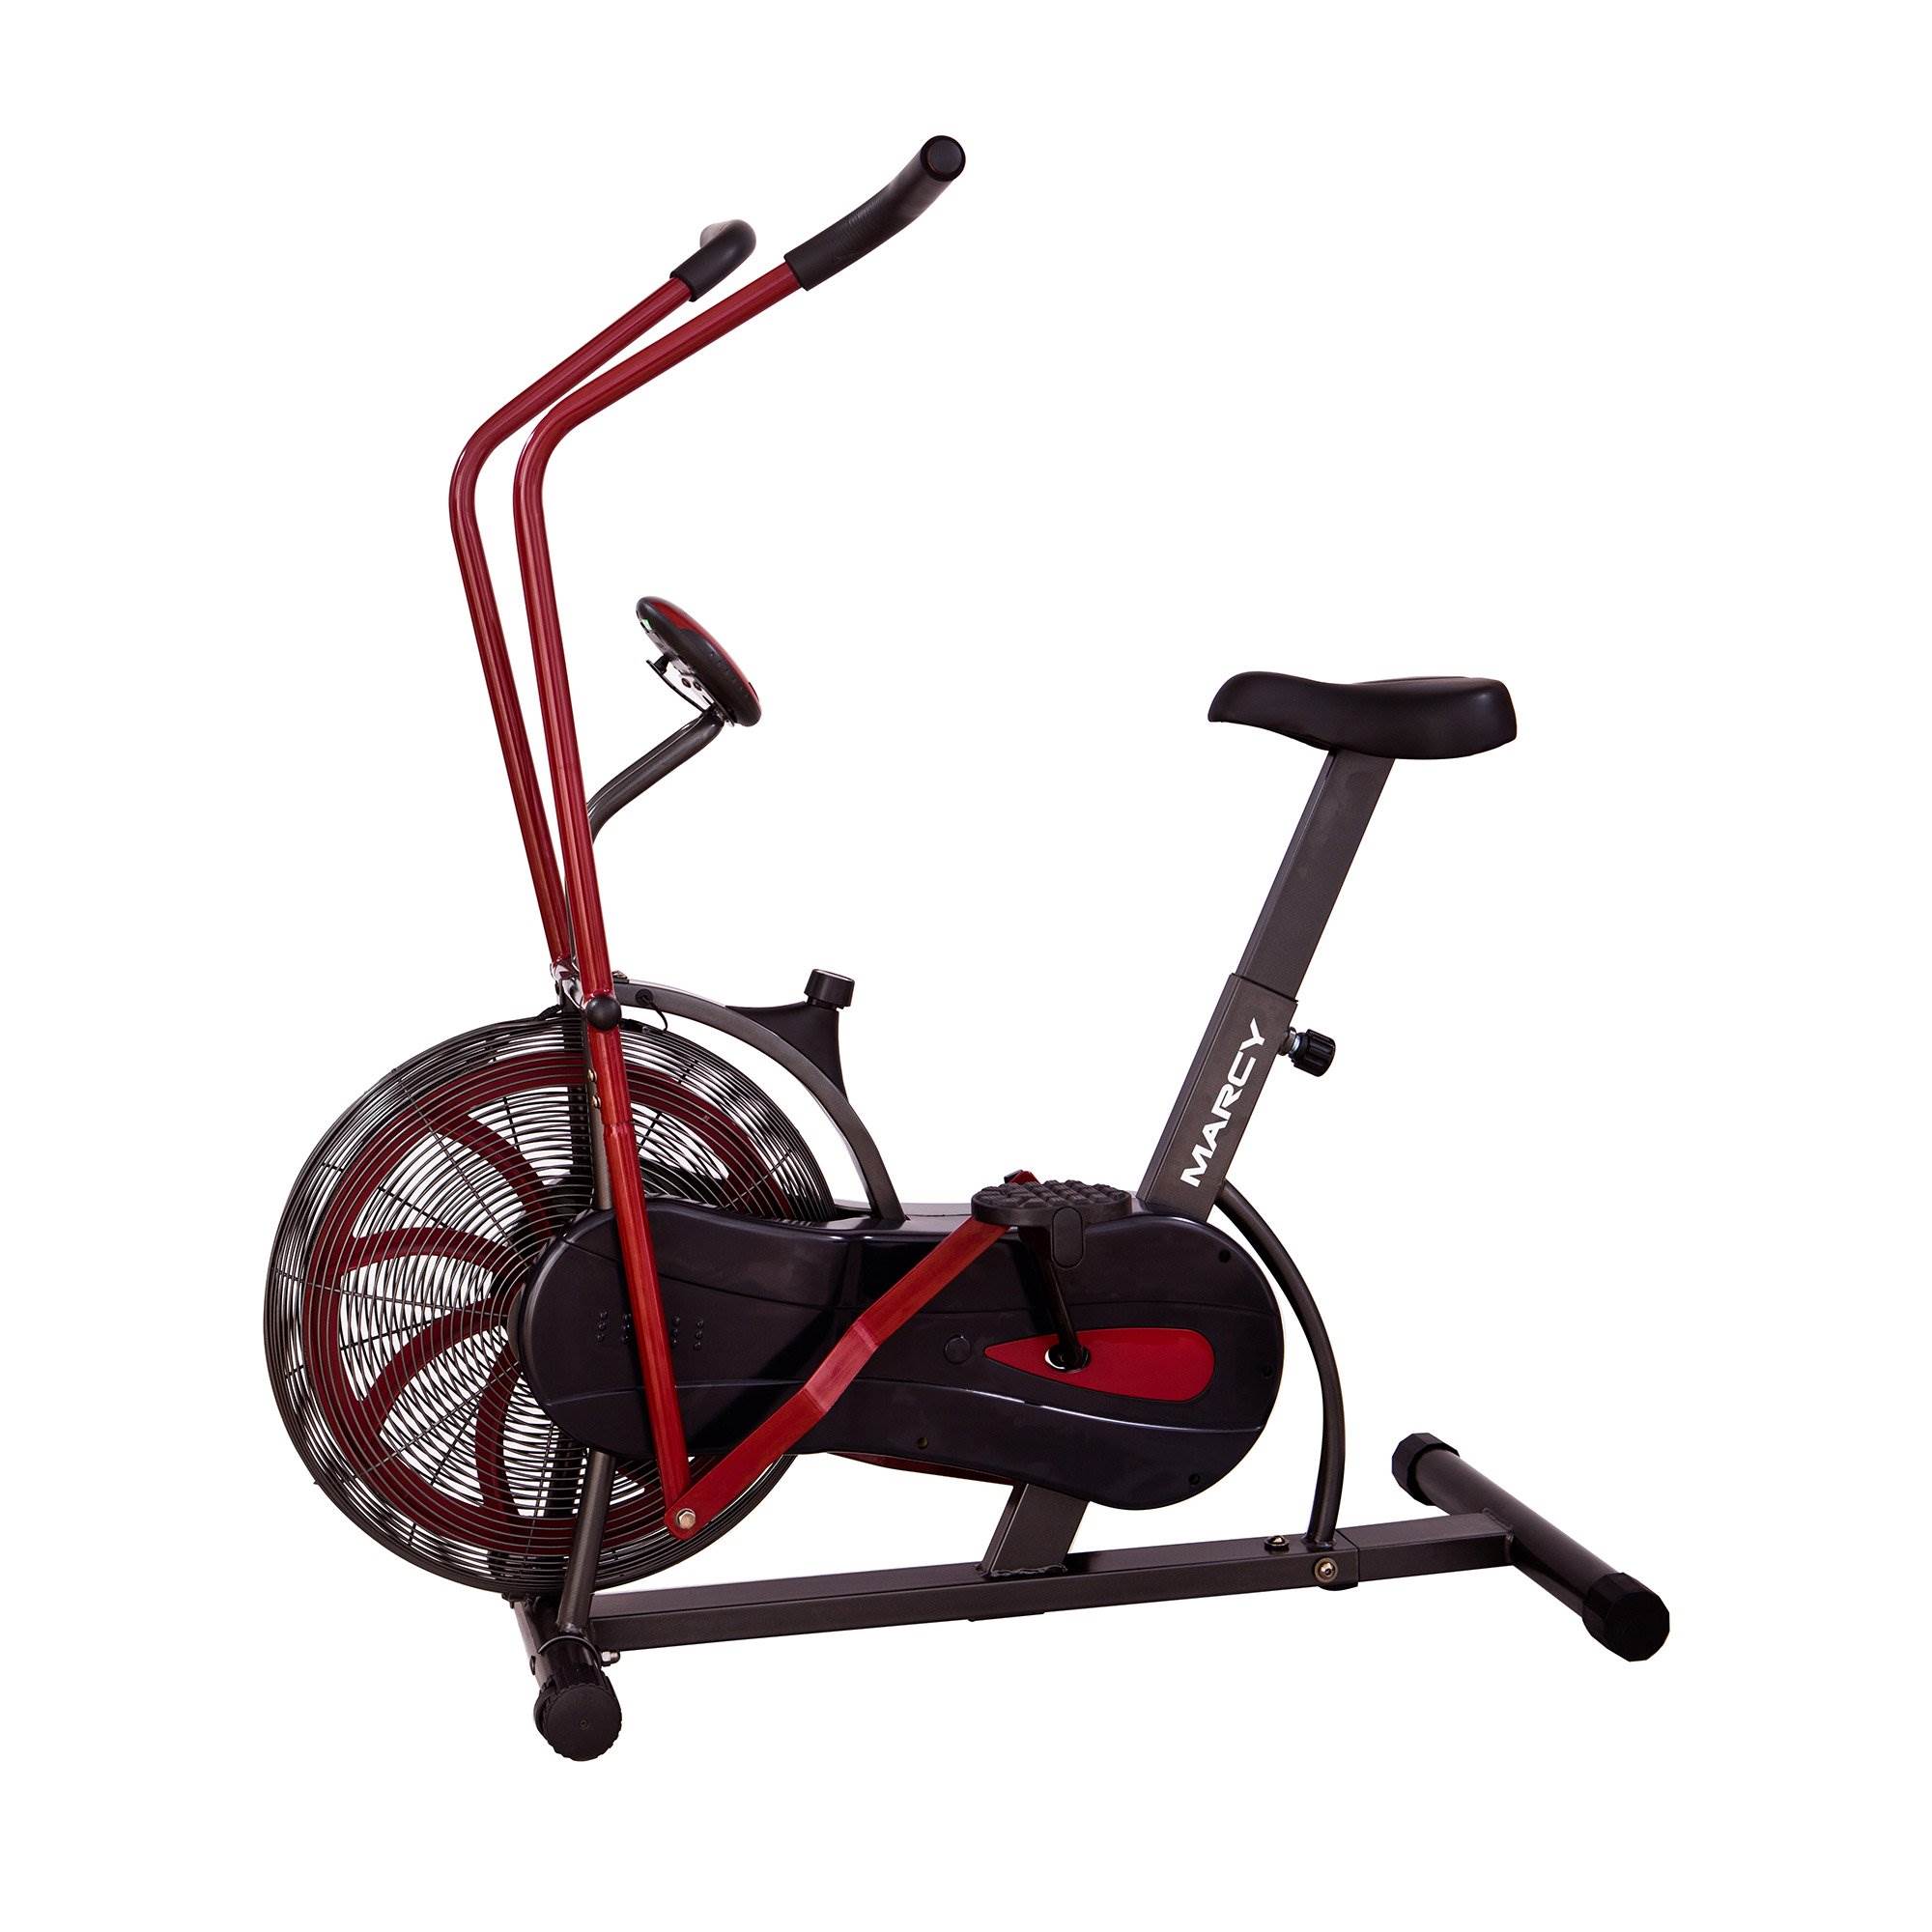 Marcy Fan Exercise Bike NS-1000 - image 3 of 9